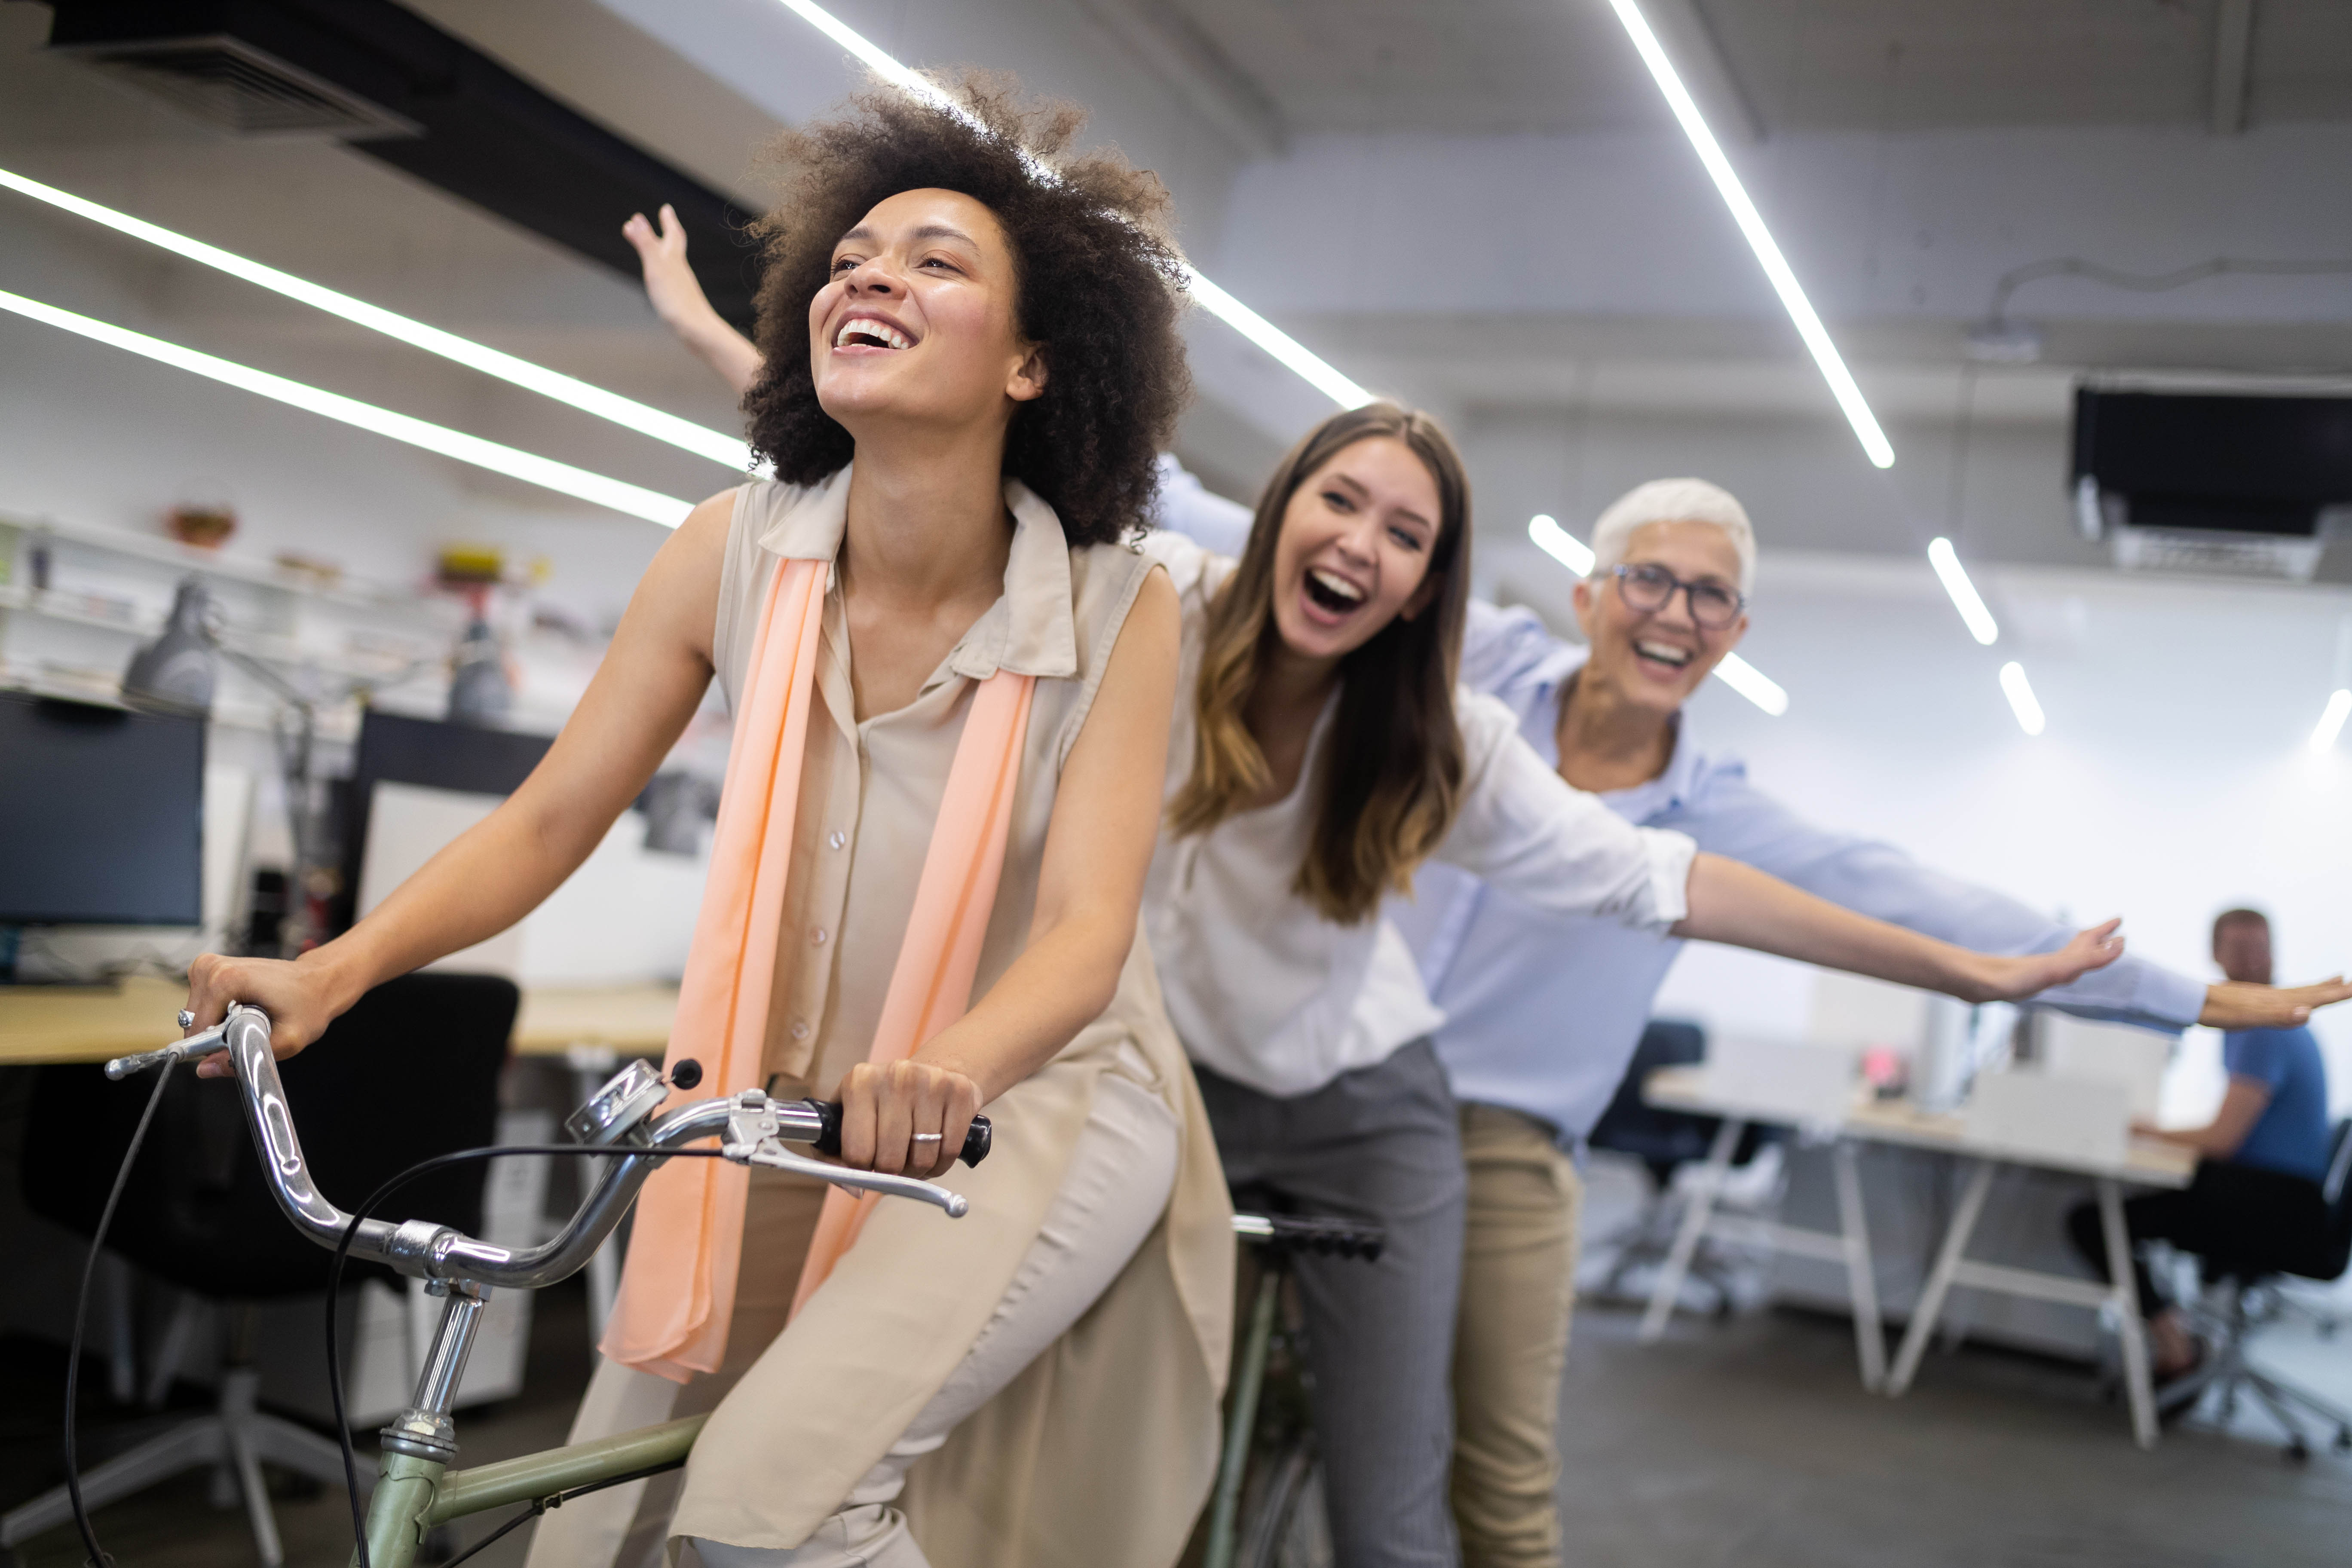 Three women of varying ages and races ride on a bike through an office laughing and throwing their arms out like they are flying